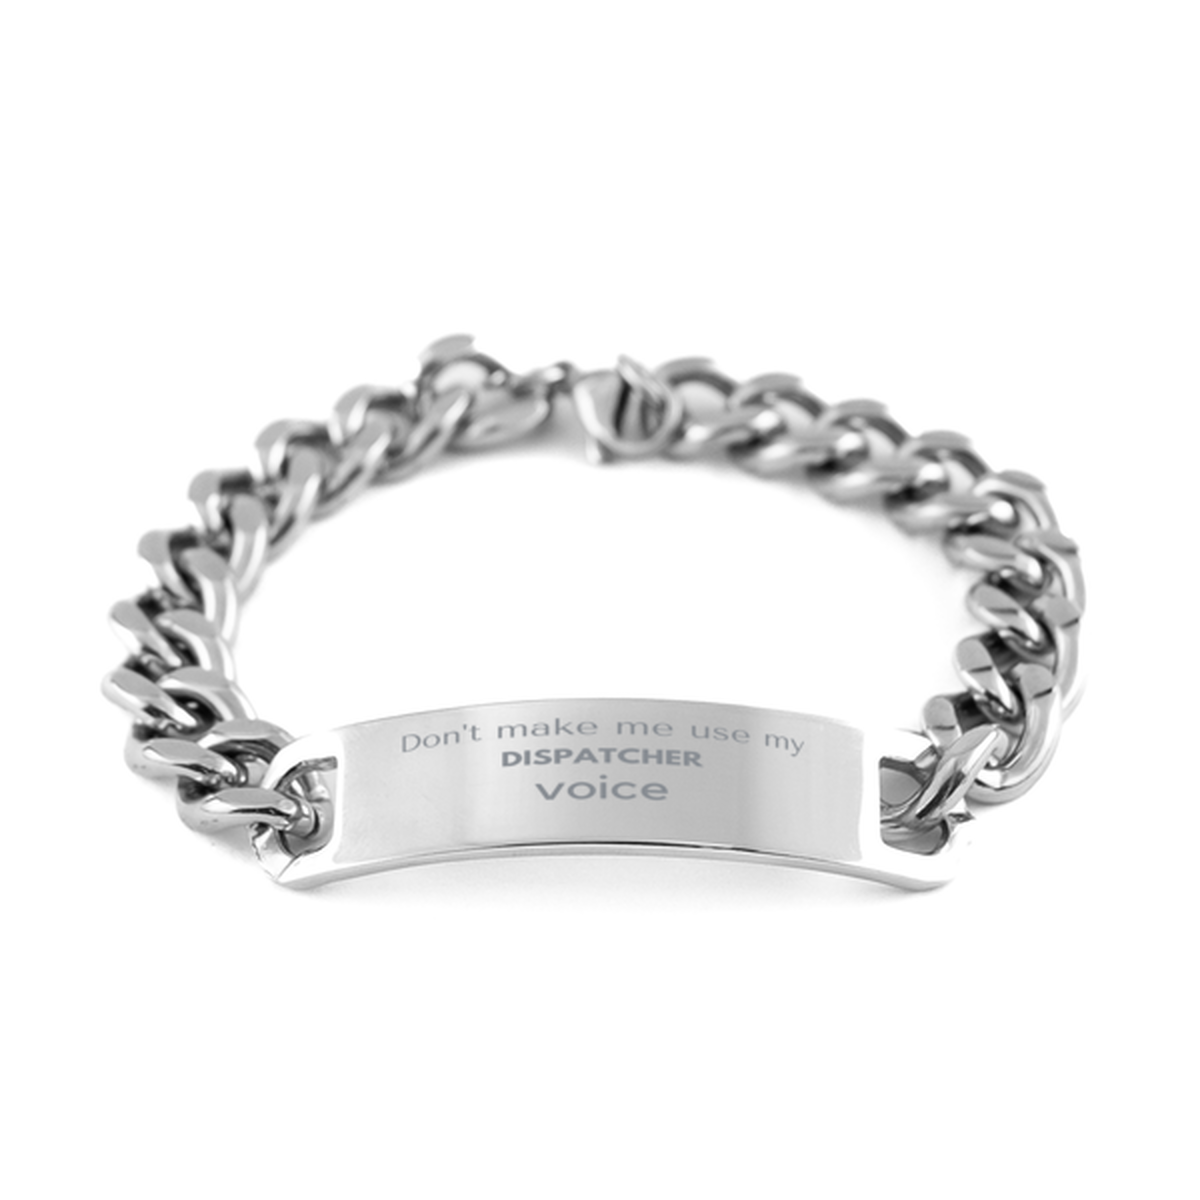 Don't make me use my Dispatcher voice, Sarcasm Dispatcher Gifts, Christmas Dispatcher Cuban Chain Stainless Steel Bracelet Birthday Unique Gifts For Dispatcher Coworkers, Men, Women, Colleague, Friends